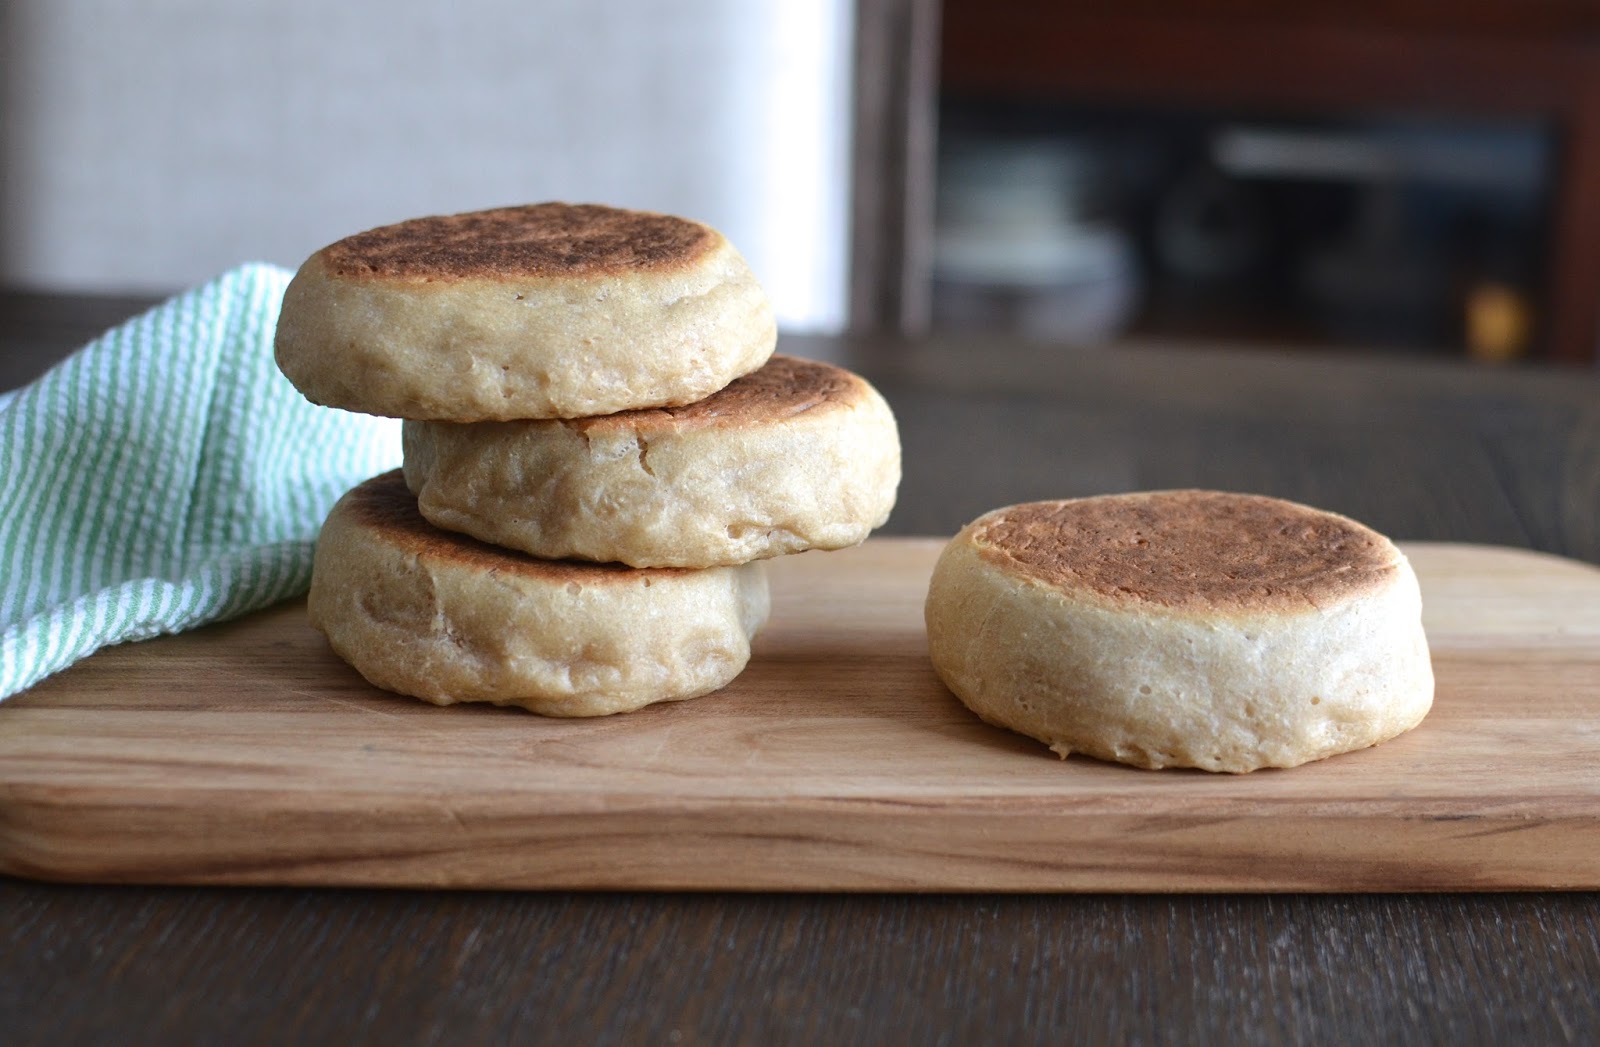 This Crunchy/Chewy Food Test Will Reveal Whether You’re Actually More Logical or Emotional English muffins